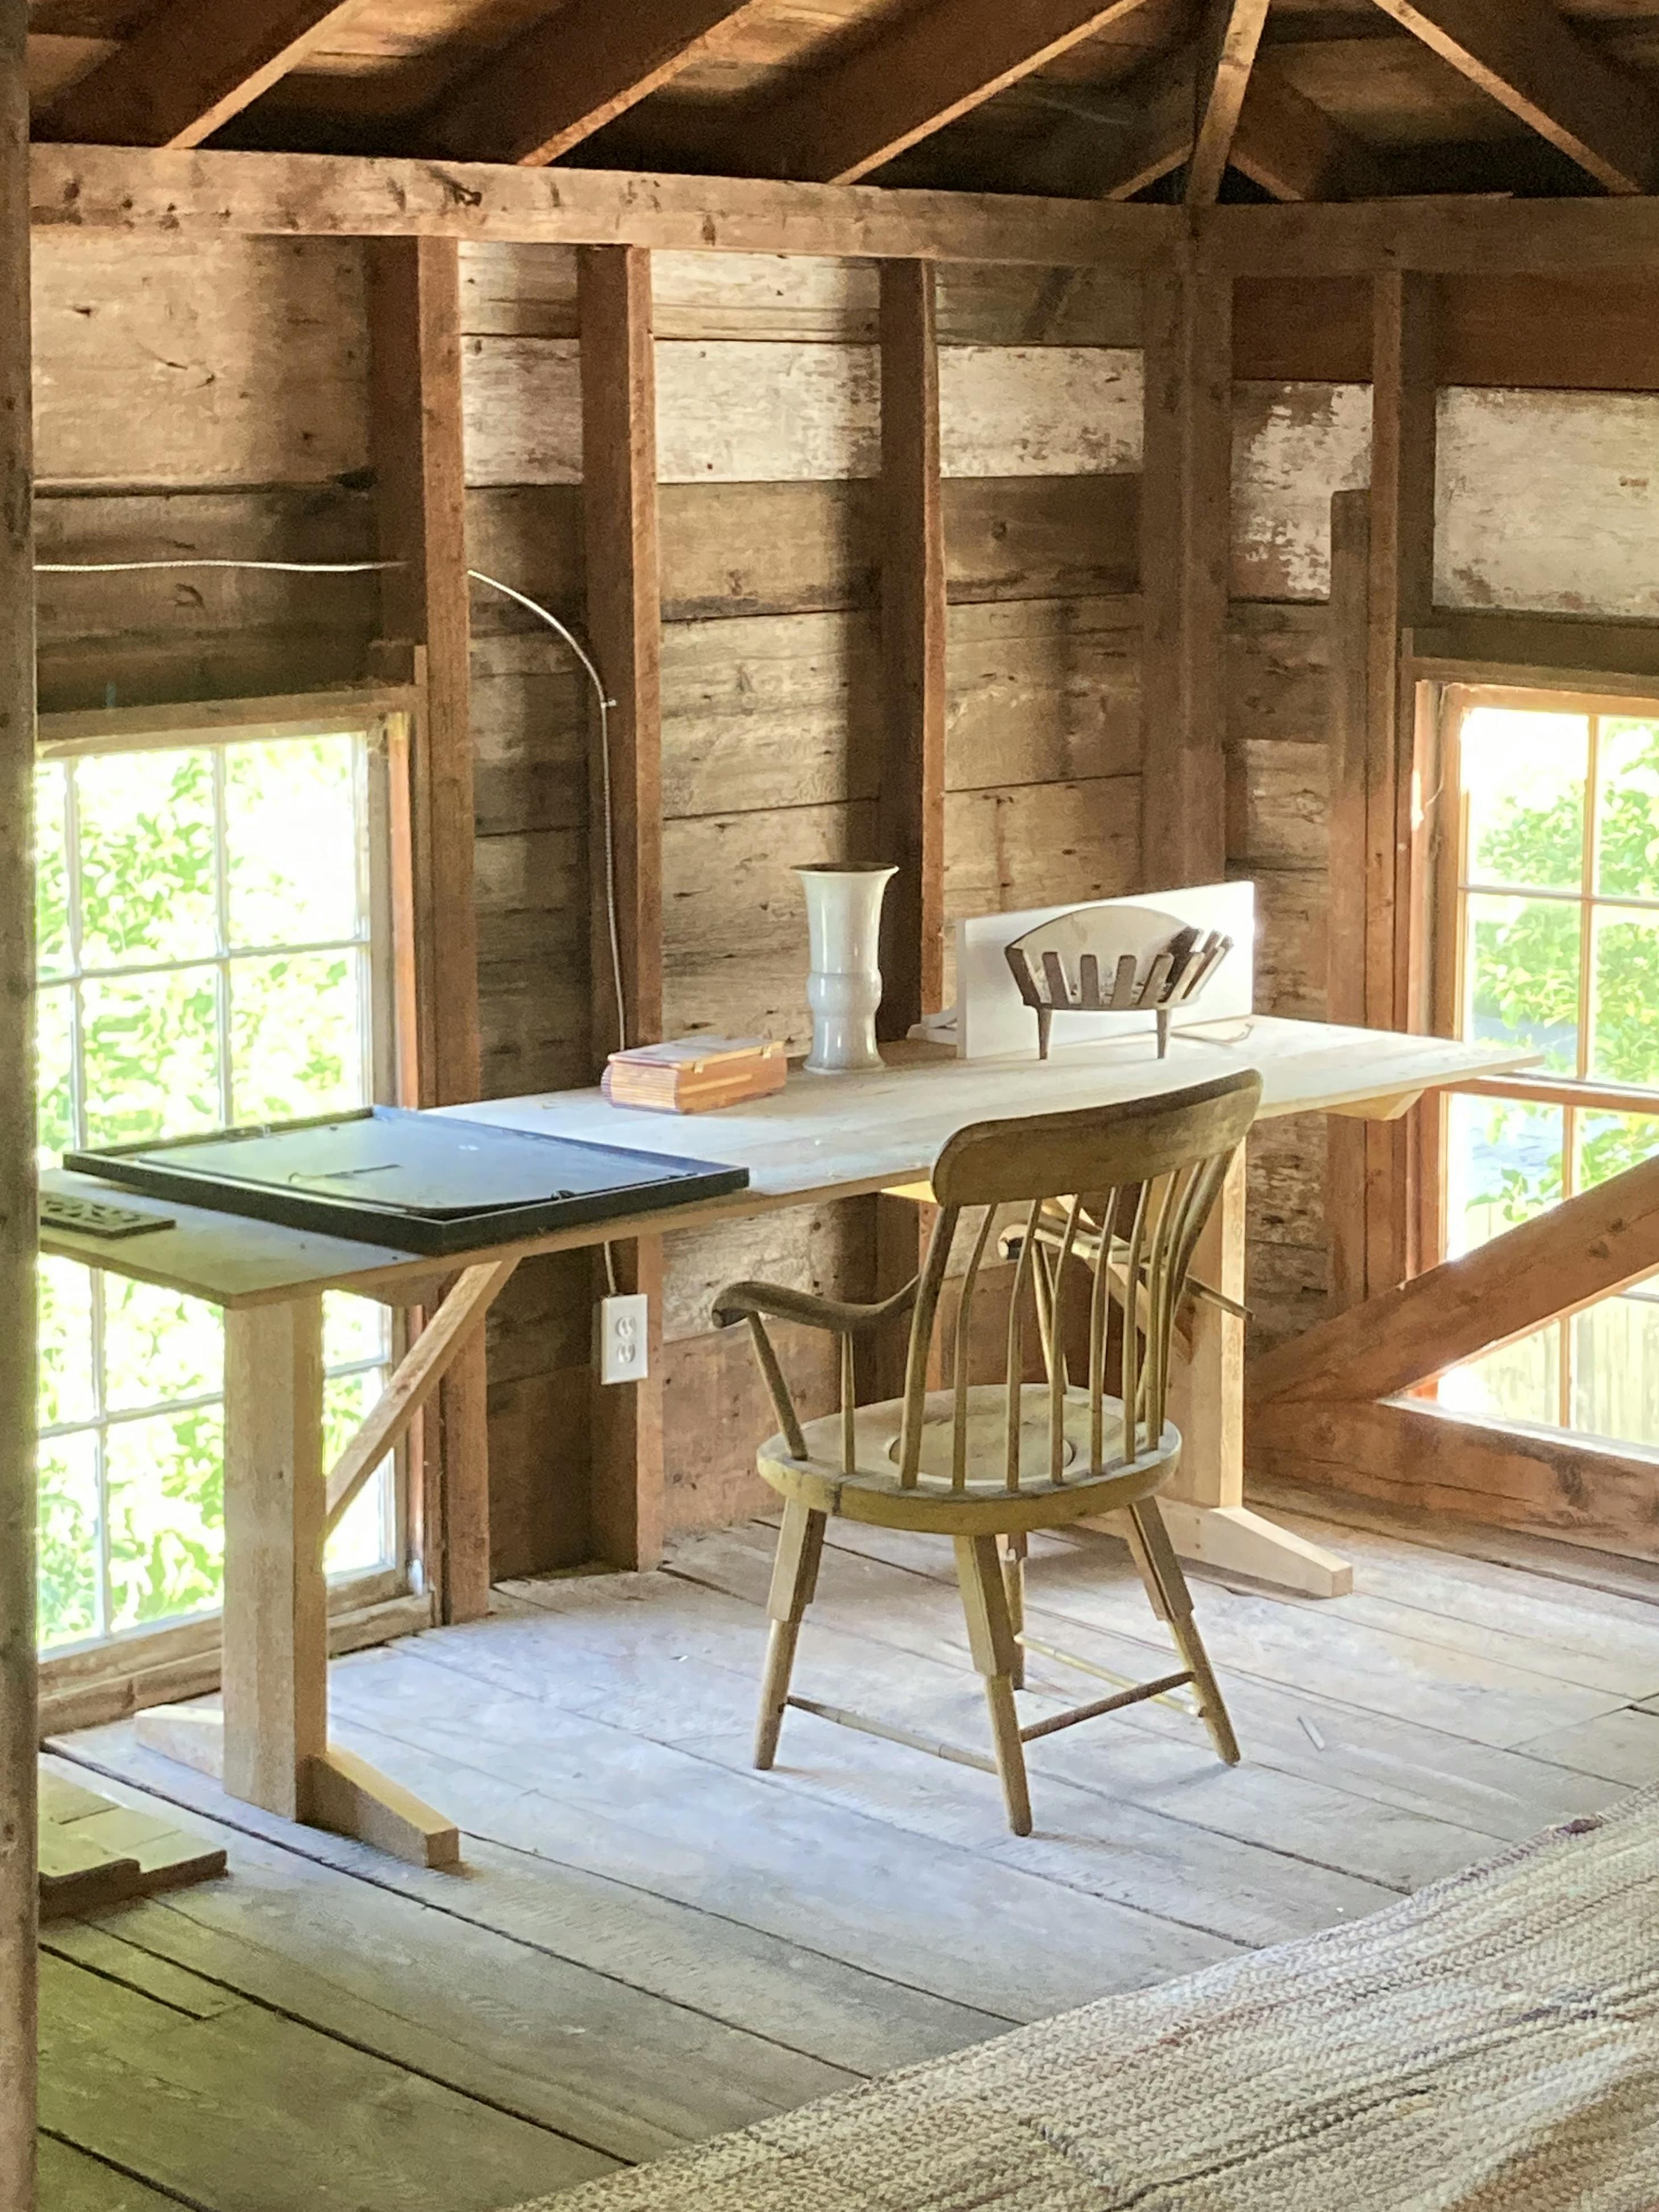 A wooden desk and chair in a sunny, wooden room with two large windows at the Waldoboro Inn in Maine.